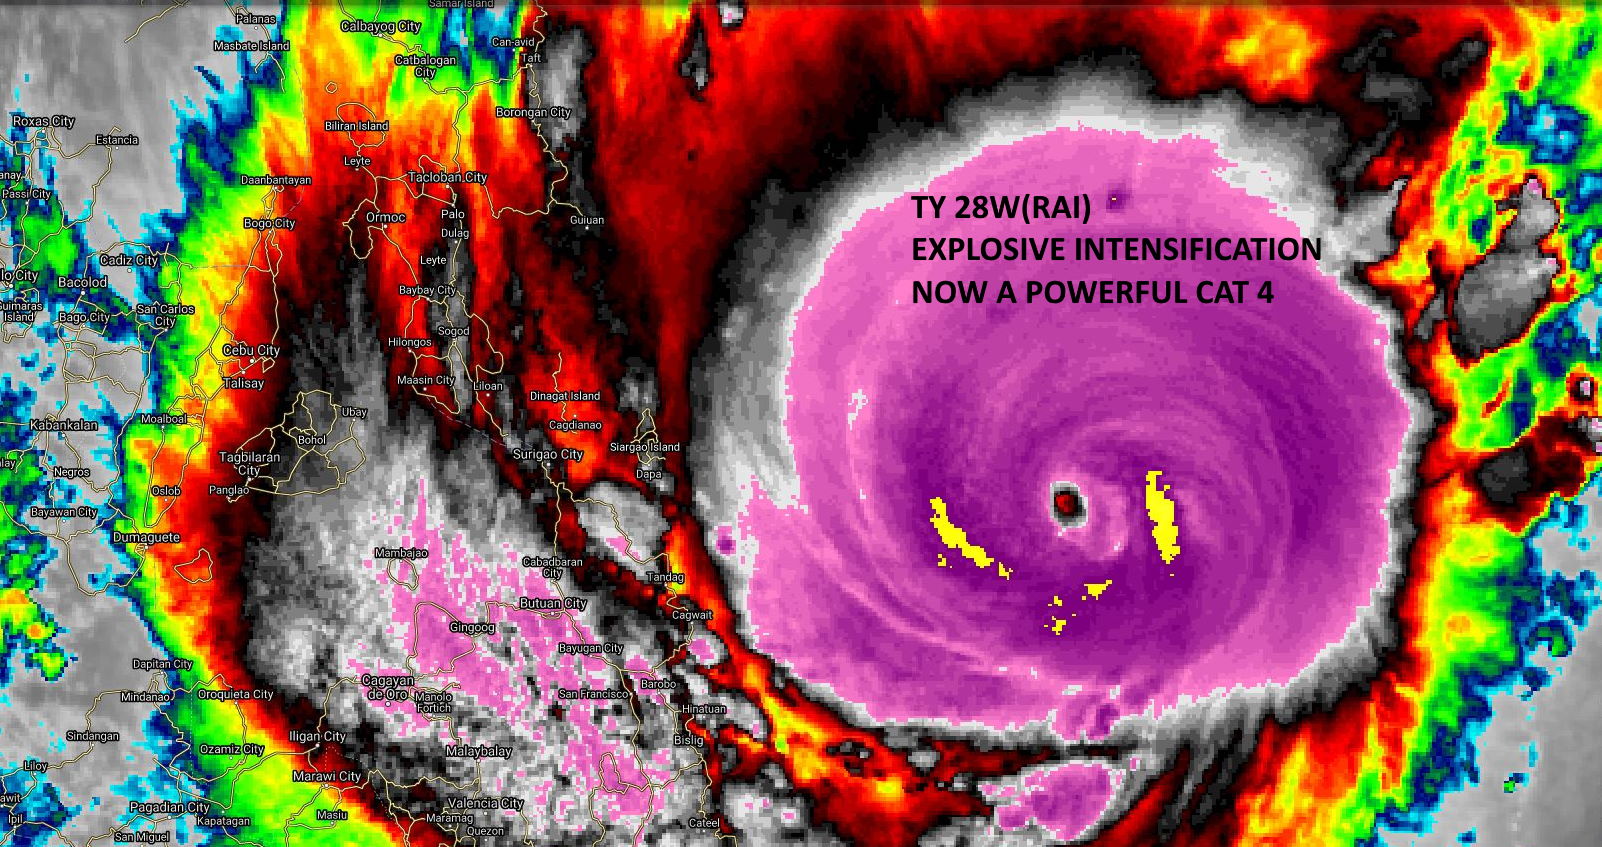 SATELLITE ANALYSIS, INITIAL POSITION AND INTENSITY DISCUSSION: TY 28W HAS UNDERGONE A PERIOD OF EXTREMELY RAPID INTENSIFICATION OVER THE PAST SIX HOURS, WITH THE INITIAL INTENSITY INCREASING OVER 30 KNOTS IN THE SIX HOUR PERIOD BETWEEN 1200Z AND 1800Z. ANIMATED ENHANCED INFRARED (EIR) SATELLITE IMAGERY OVER THE PREVIOUS FEW HOURS SHOWS THE RAPID DEVELOPMENT OF A PINHOLE EYE APPROXIMATELY 13KM IN DIAMETER WITH DEEP CONVECTIVE TOWERS ROTATING UPSHEAR TO THE EAST OF THE EYE. 151626Z AMSR2 89GHZ AND 37GHZ MICROWAVE IMAGES SHOW THE VERY WELL DEFINED EYE, WHICH IS VERTICALLY STACKED WITH LITTLE TO NO TILT, INDICATING A VAST IMPROVEMENT FROM THE PREVIOUSLY TILTED CORE. THE INITIAL POSITION IS ASSESSED WITH HIGH CONFIDENCE BASED ON THE PINHOLE EYE IN BOTH THE EIR AND MICROWAVE DATA. MODERATE EASTERLY SHEAR, OF AROUND 10-15 KNOTS IS INDICATED BY THE SHARP UPSHEAR EDGE OF THE CONVECTIVE ENVELOPE AND CIRRUS SHIELD SEEN IN THE INFRARED AND MICROWAVE IMAGERY. HOWEVER THE CONVECTIVE TOWERS HAVING MOVED UPSHEAR HAVE SHELTERED THE CORE FROM THE EASTERLY SHEAR AND ENABLED THE RAPID INTENSIFICATION. THE INITIAL INTENSITY HAS BEEN INCREASED DRAMATICALLY, TO A CONSERVATIVE 115 KNOTS, CONSERVATIVE DUE TO THE EXTREMELY RAPID RATE OF INTENSIFICATION. AGENCY FIXES ARE BEING HELD BY CONSTRAINTS, BUT DATA-T NUMBERS ARE CLIMBING RAPIDLY, NOW EXCEEDING T7.0 IN SOME CASES. DUE TO THE SMALL EYE AND RAPIDLY DEVELOPING SITUATION, THE ADT IS SIGNIFICANTLY BEHIND, THOUGH SUBSEQUENT TO THE 2000Z HOUR IS BEGINNING TO PICK UP THE EYE, WITH RAW-T NUMBERS NOW ABOVE T7.0. THE ENVIRONMENT IS VERY FAVORABLE FOR CONTINUED DEVELOPMENT, WITH WARM (29-30C) SSTS AND ROBUST WESTWARD AND POLEWARD OUTFLOW. THE SYSTEM WILL ALSO PASS OVER A DEEP POOL OF WARM WATERS WITH HIGH OHC FROM NOW THROUGH LANDFALL IN THE PHILIPPINES.